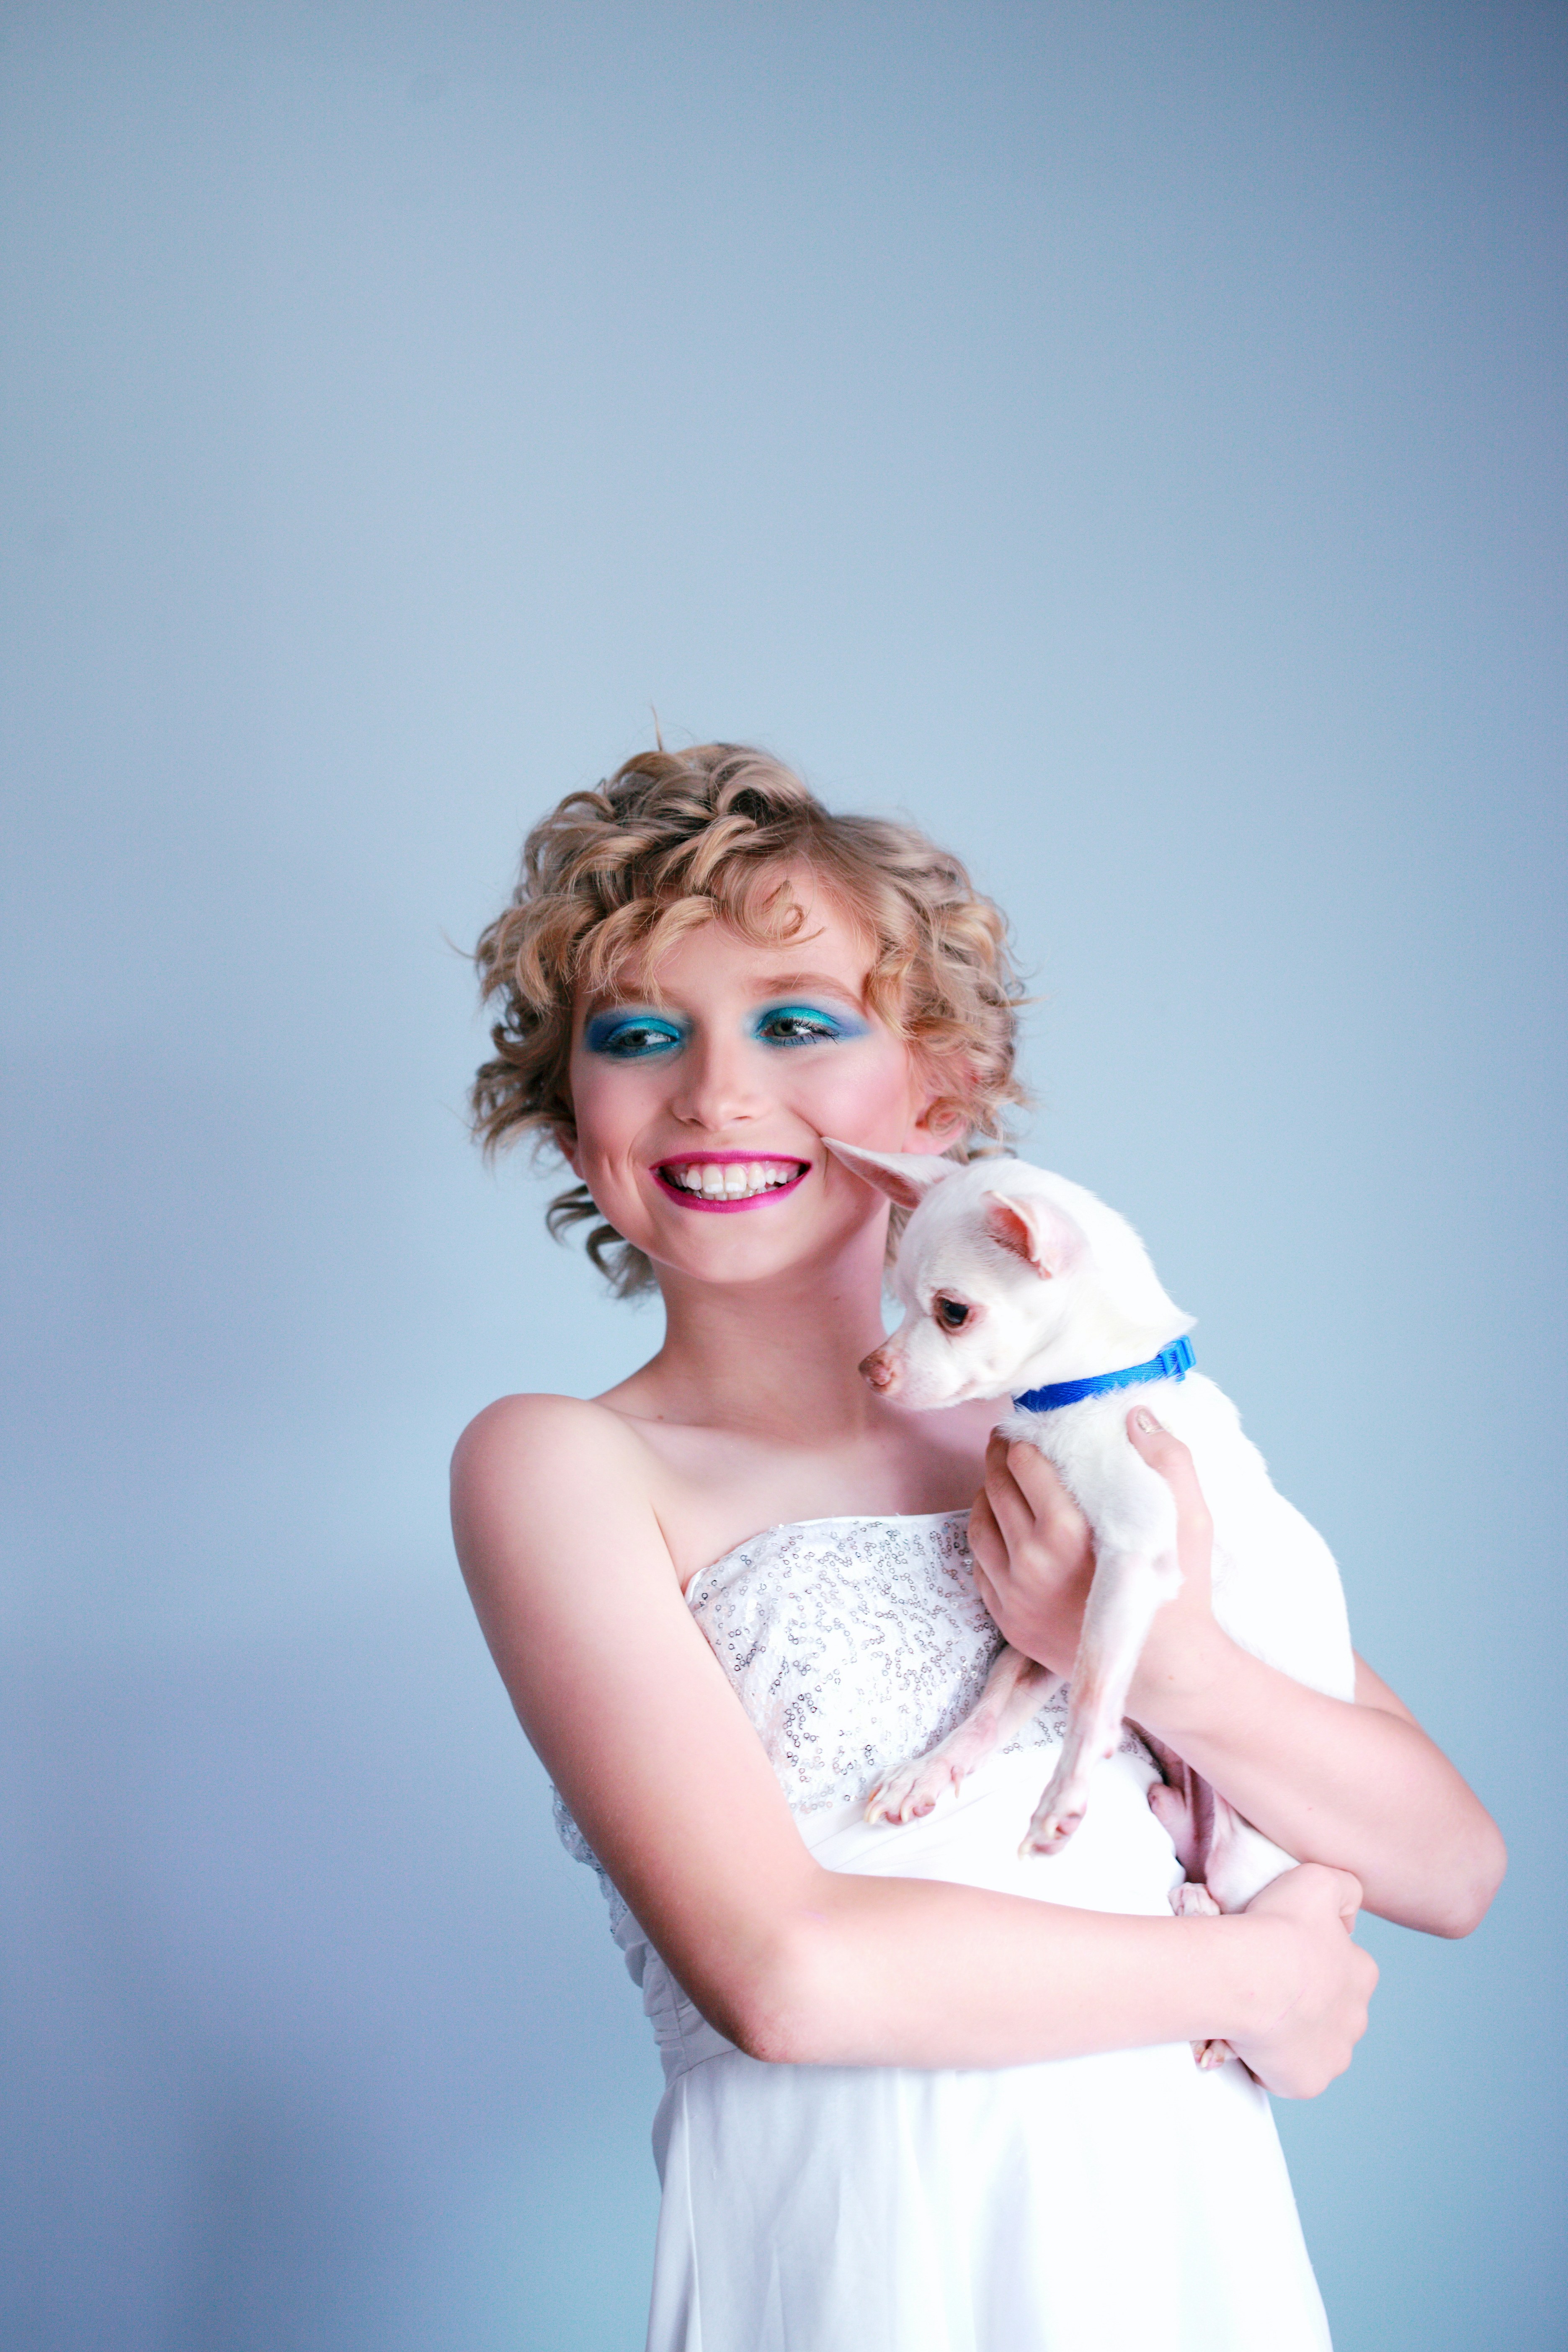 Bink, drag kid, with her chihuahua.